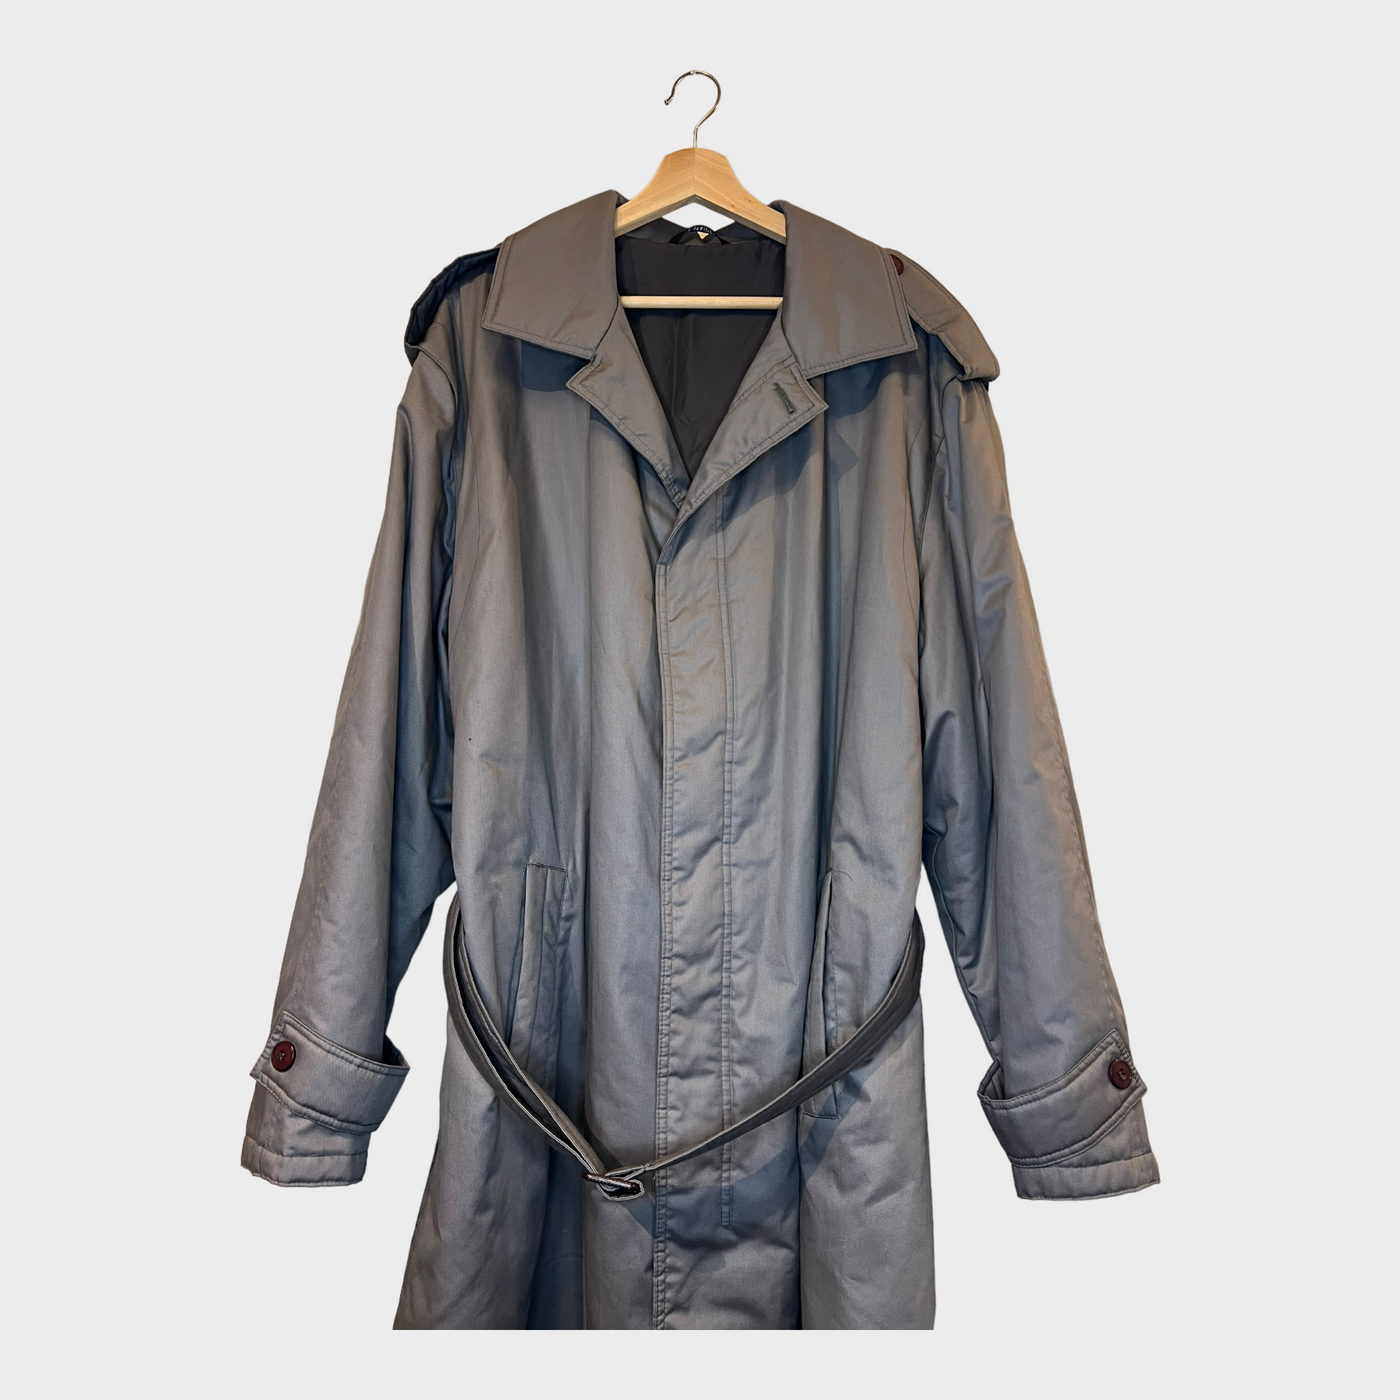 Padded trenchcoat in a cool grey color keeping you warm the whole winter - Close-up